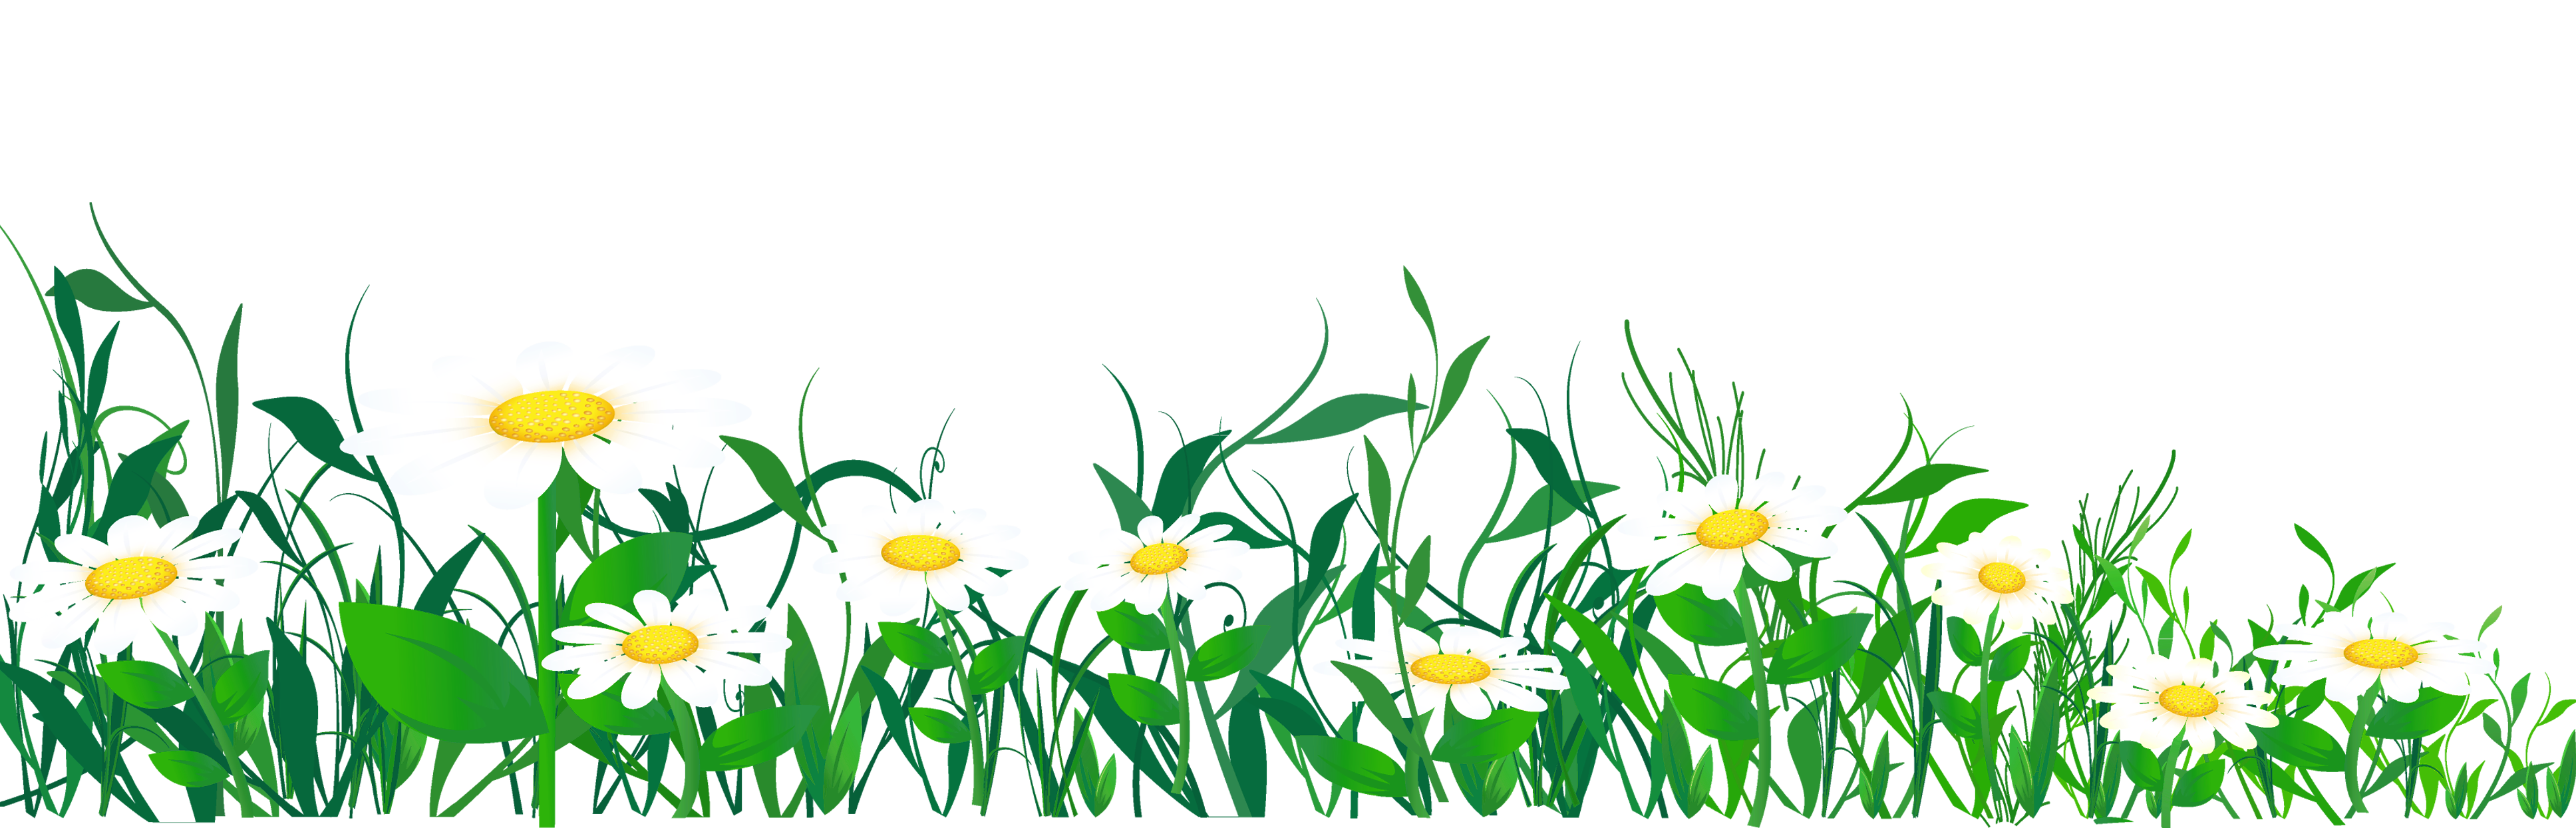 Daisies and Grass PNG Clipart Picture